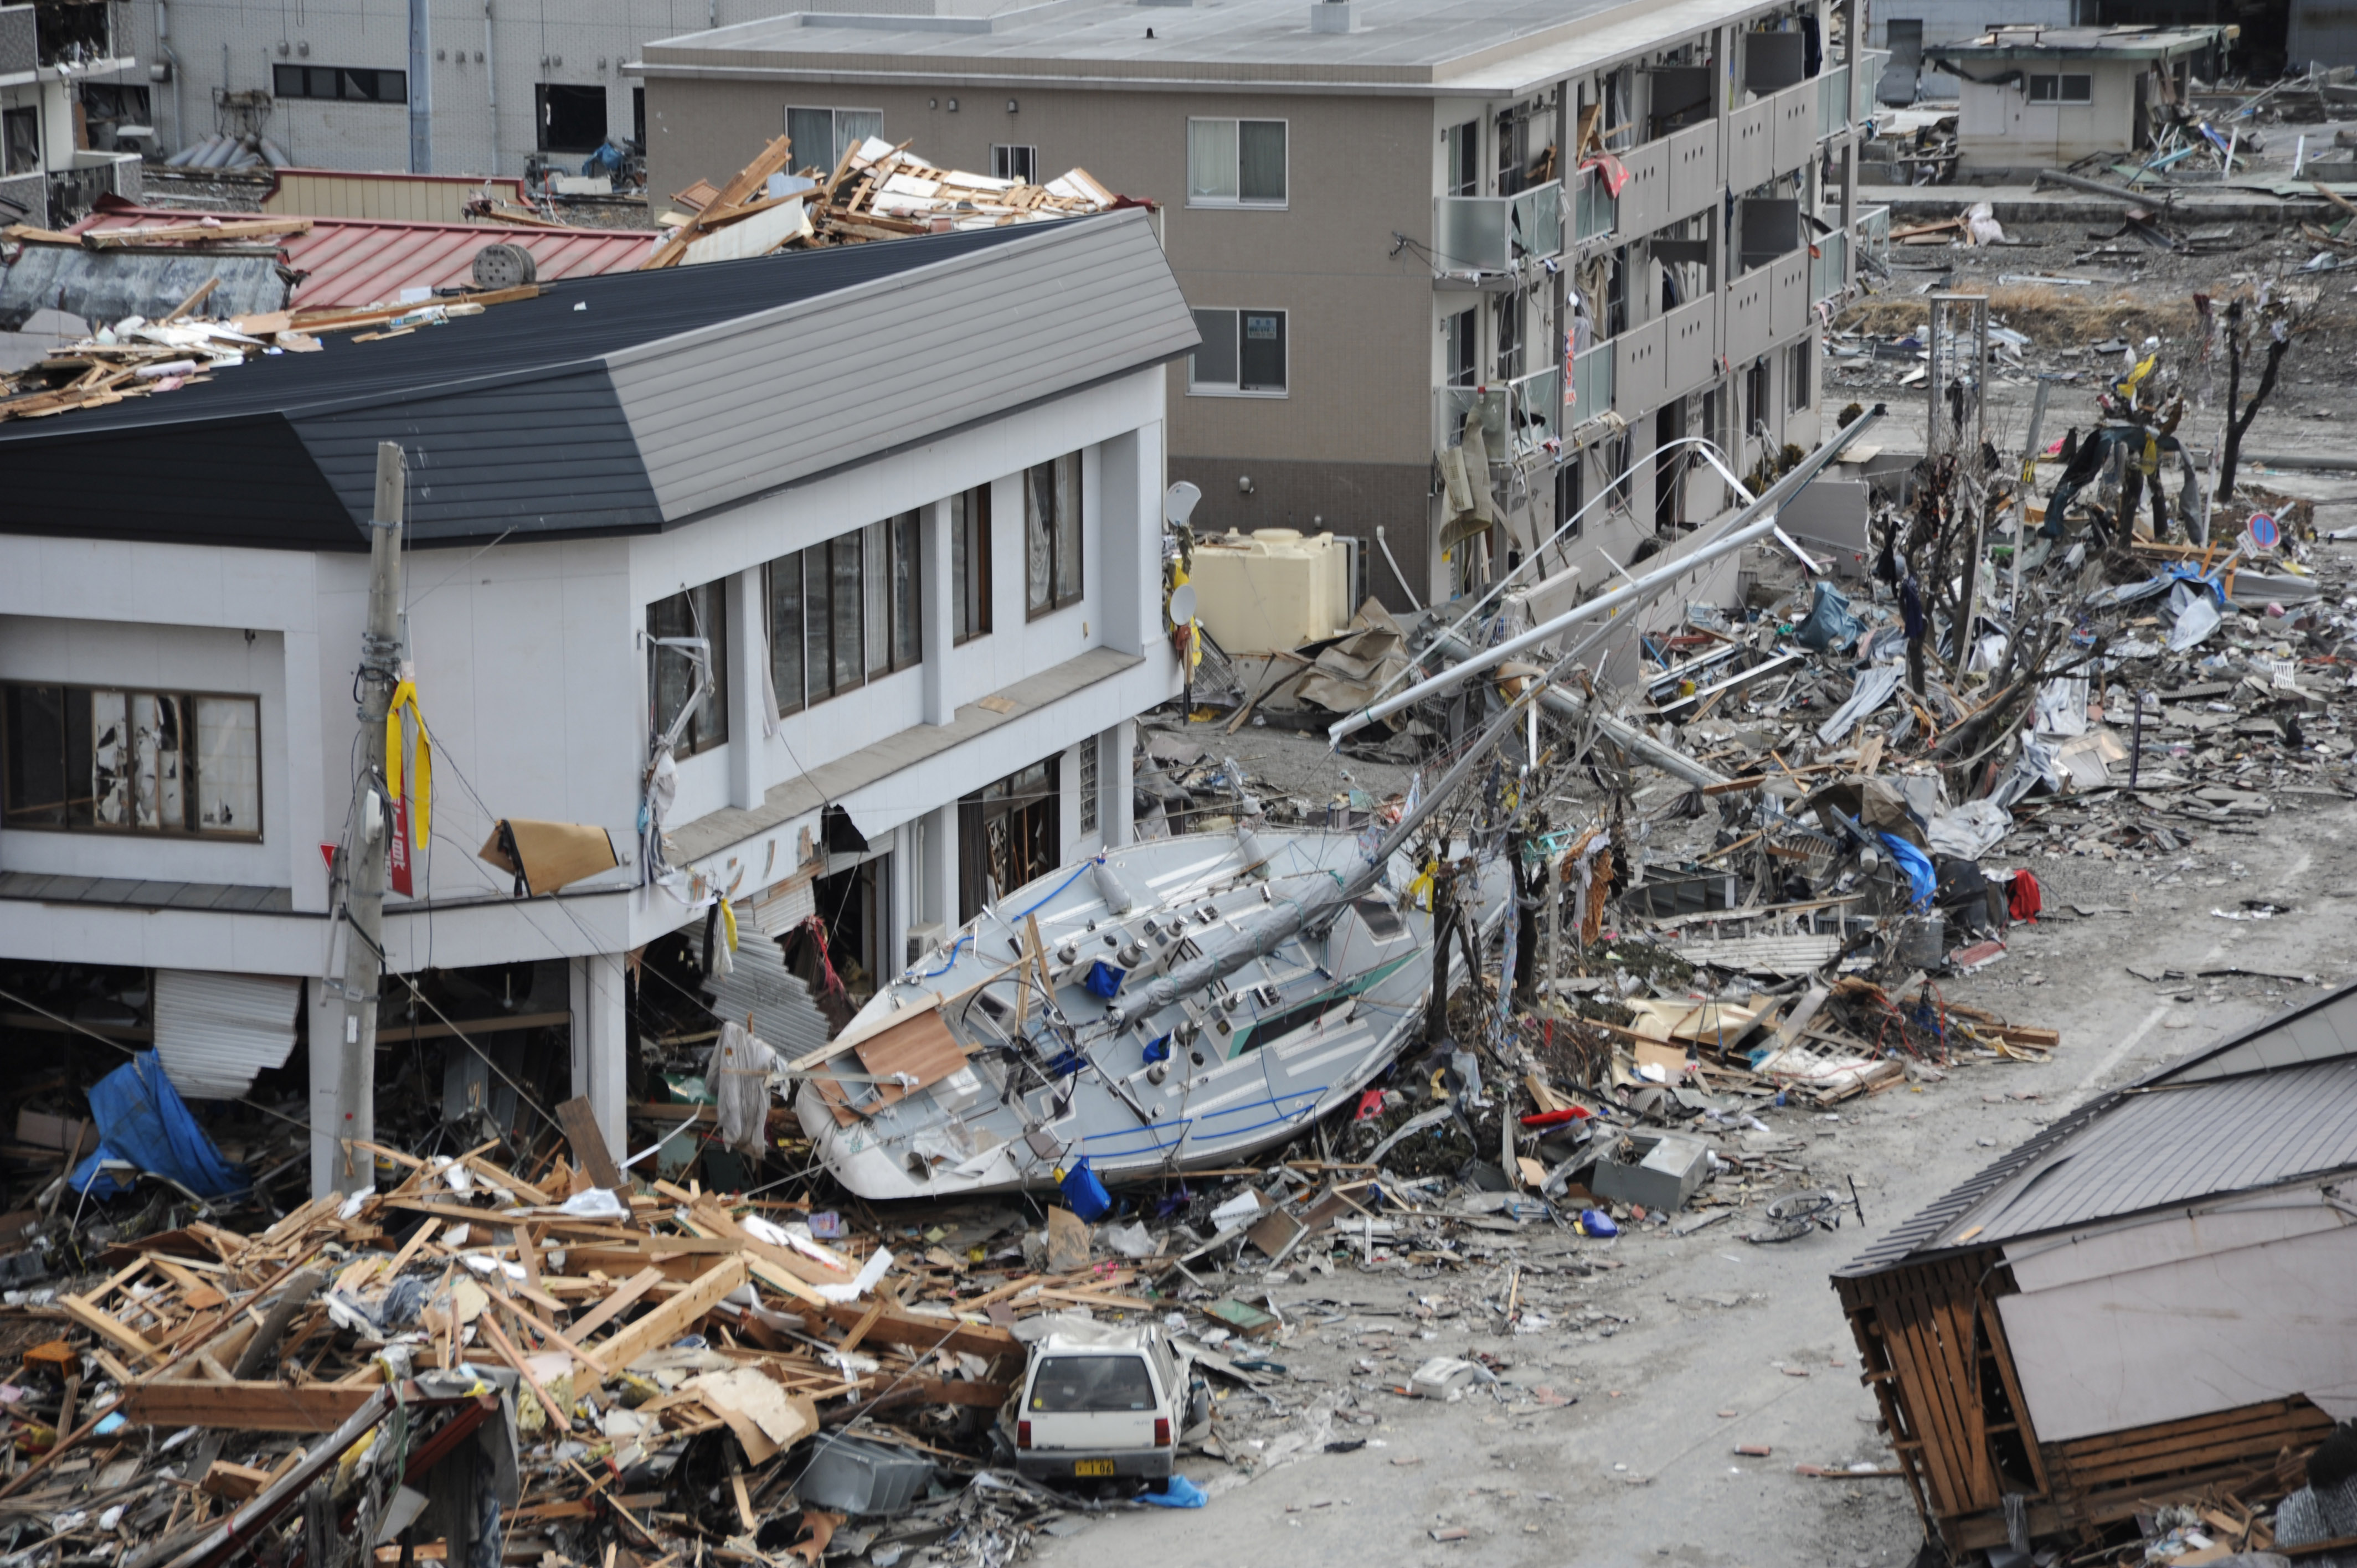 A fishing boat among the debris in Ofunato, Japan, following the 9.0-magnitude earthquake and subsequent tsunami (Source: Matthew M. Bradley/Wikimedia Commons)